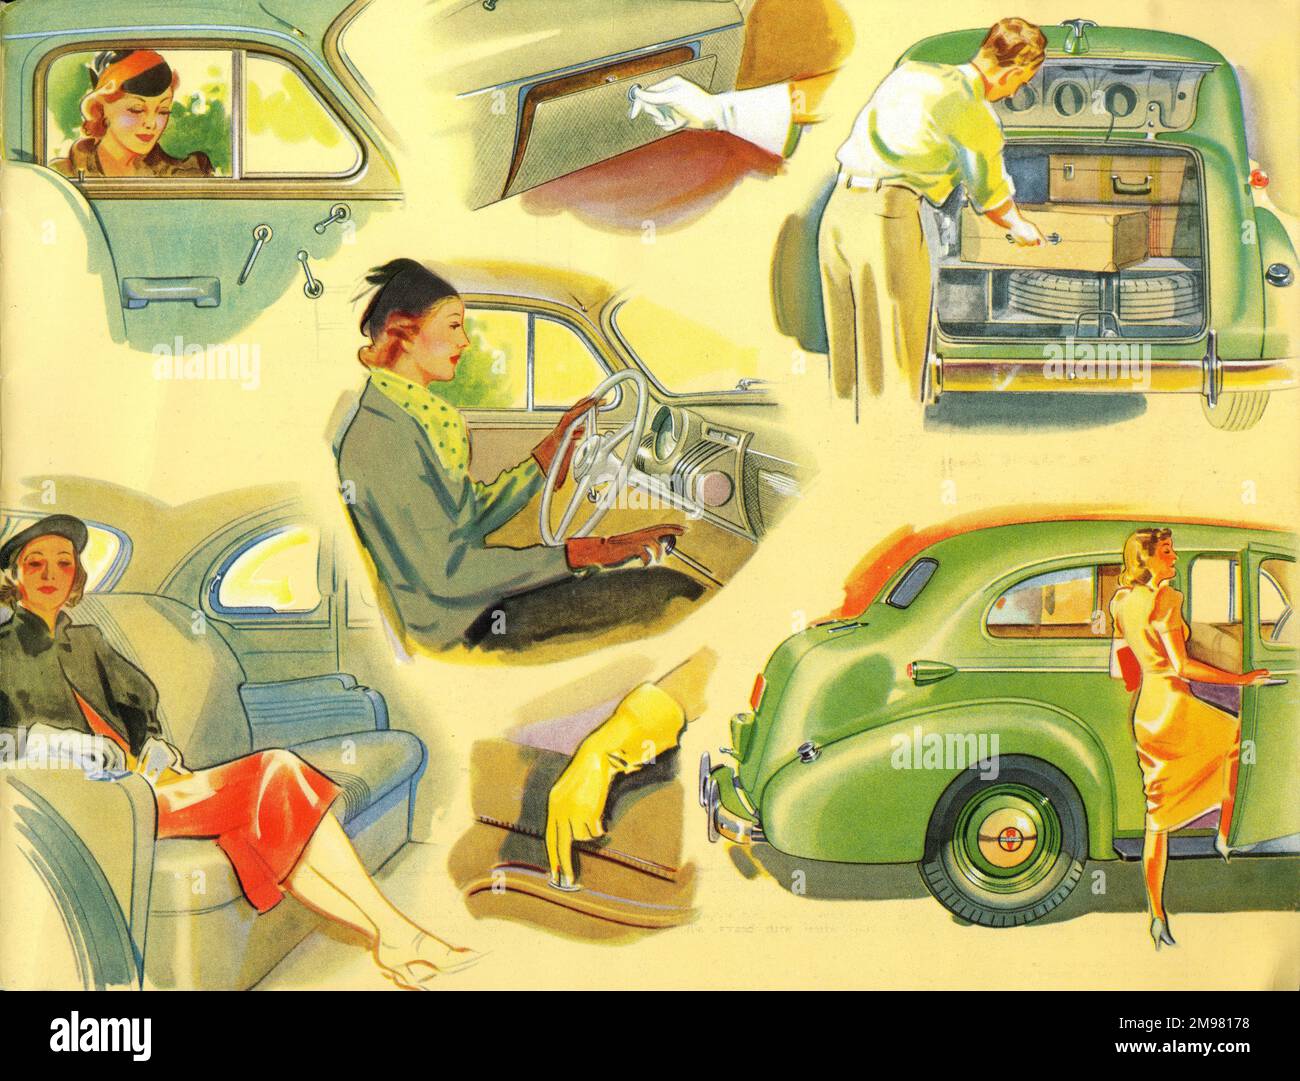 Brochure illustration, Oldsmobile car, showing a range of interior and exterior views. Stock Photo